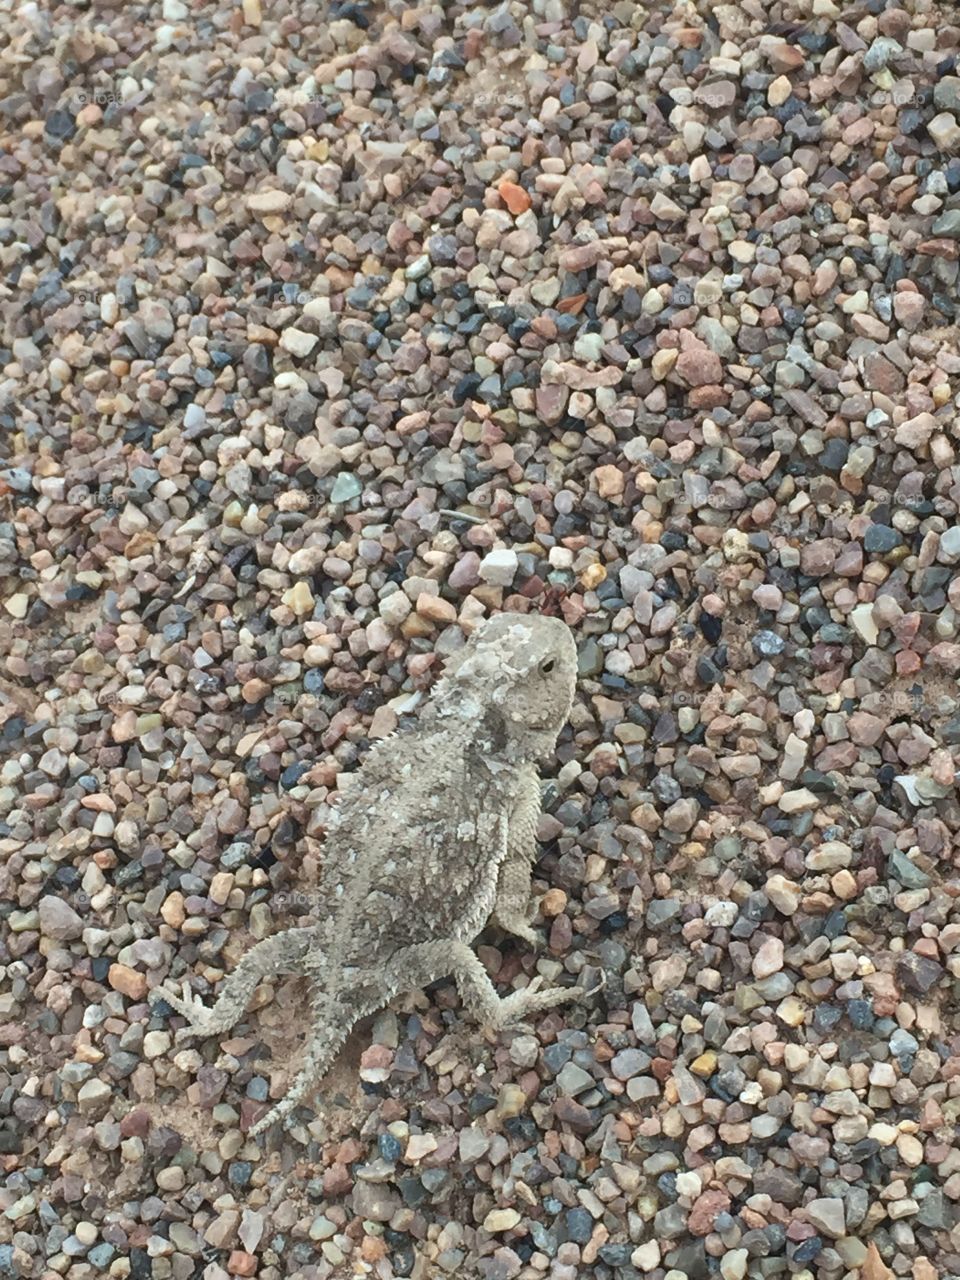 Tiny Horny Toad found in SW Wyoming.